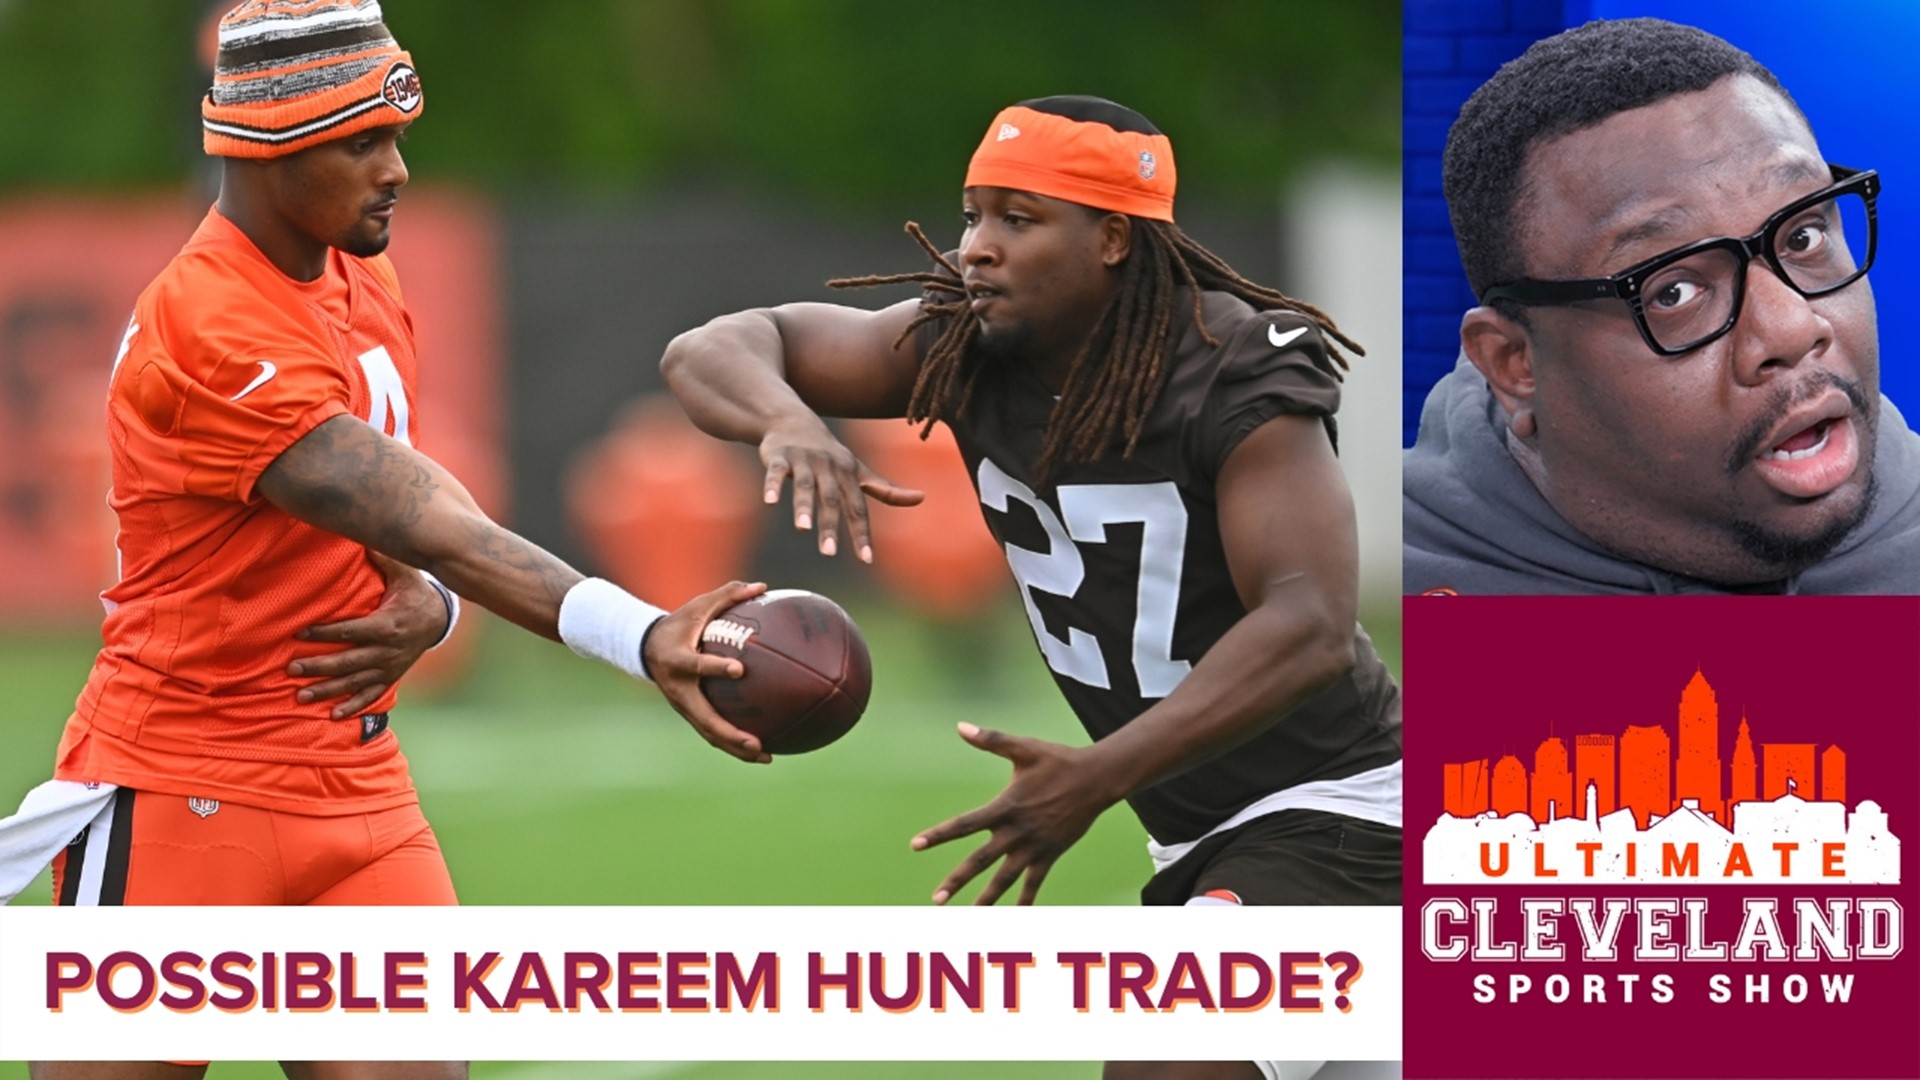 The guys agree that it doesn't make sense to trade Kareem Hunt despite him being one of the best running backs in the NFL.